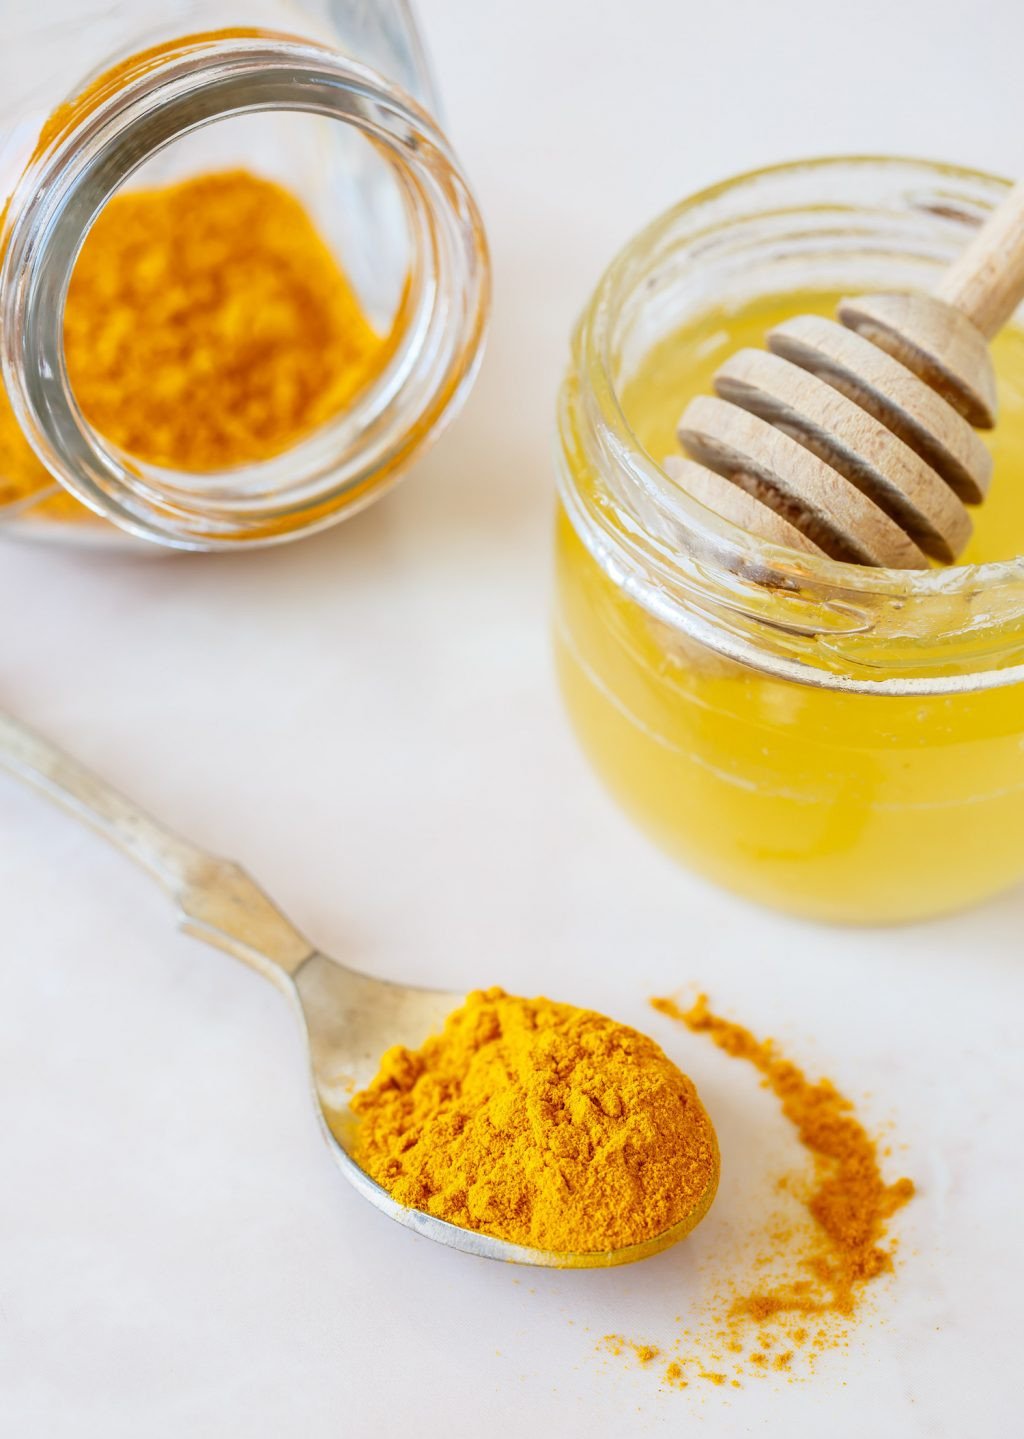 DIY Turmeric Face Mask
 3 DIY Turmeric Face Mask Recipes to Boost Your Skin